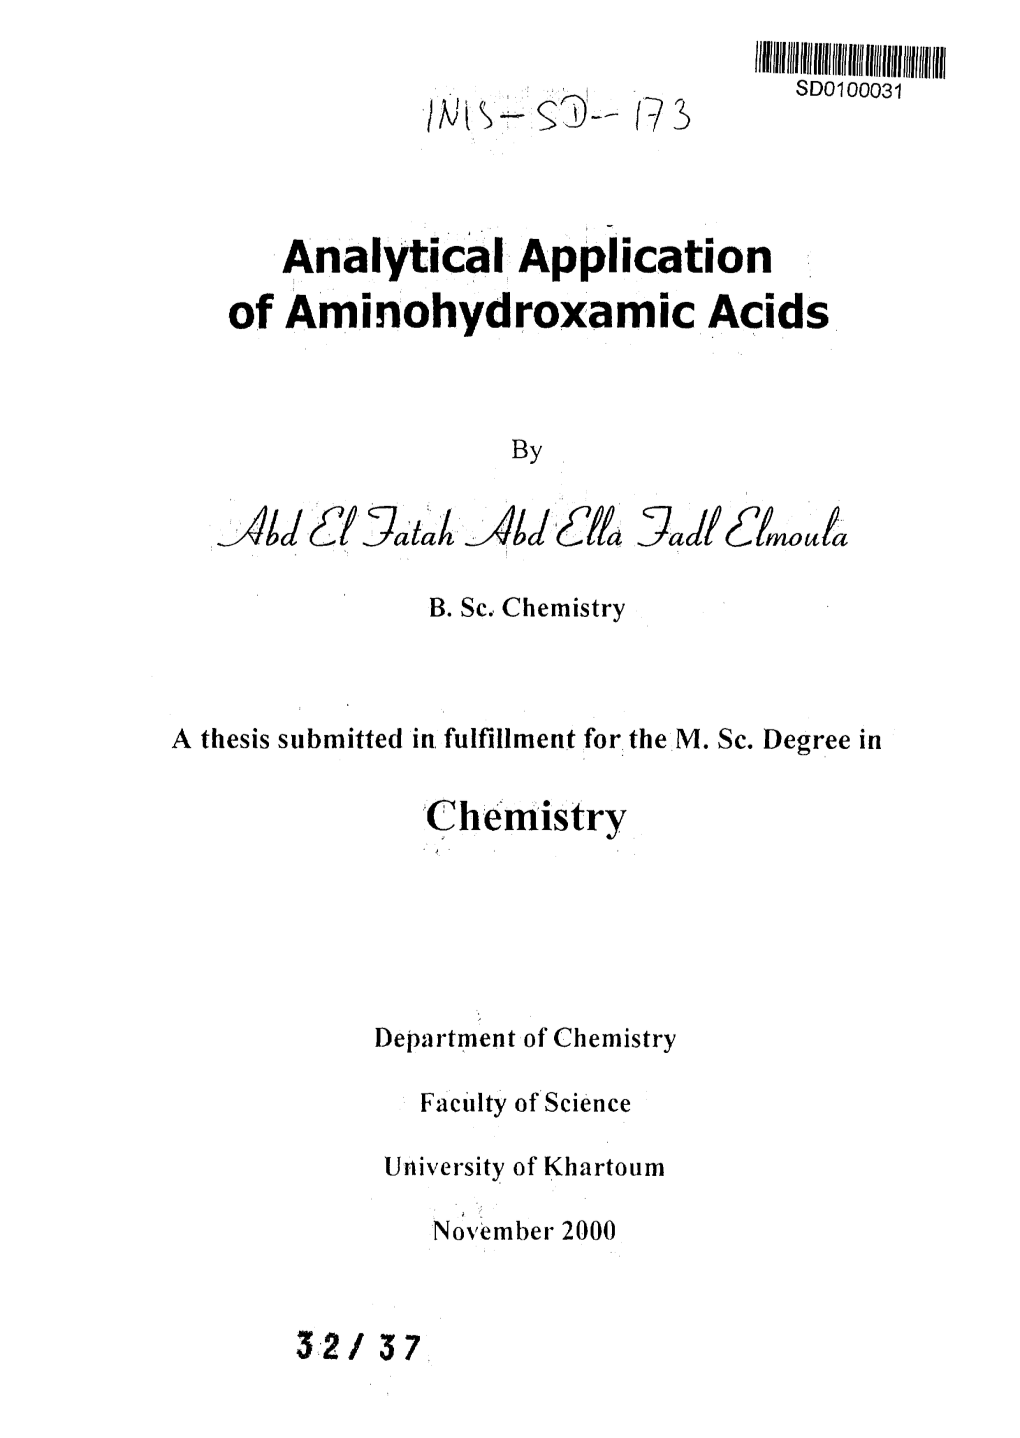 Analytical Application of Aminohydroxamic Acids